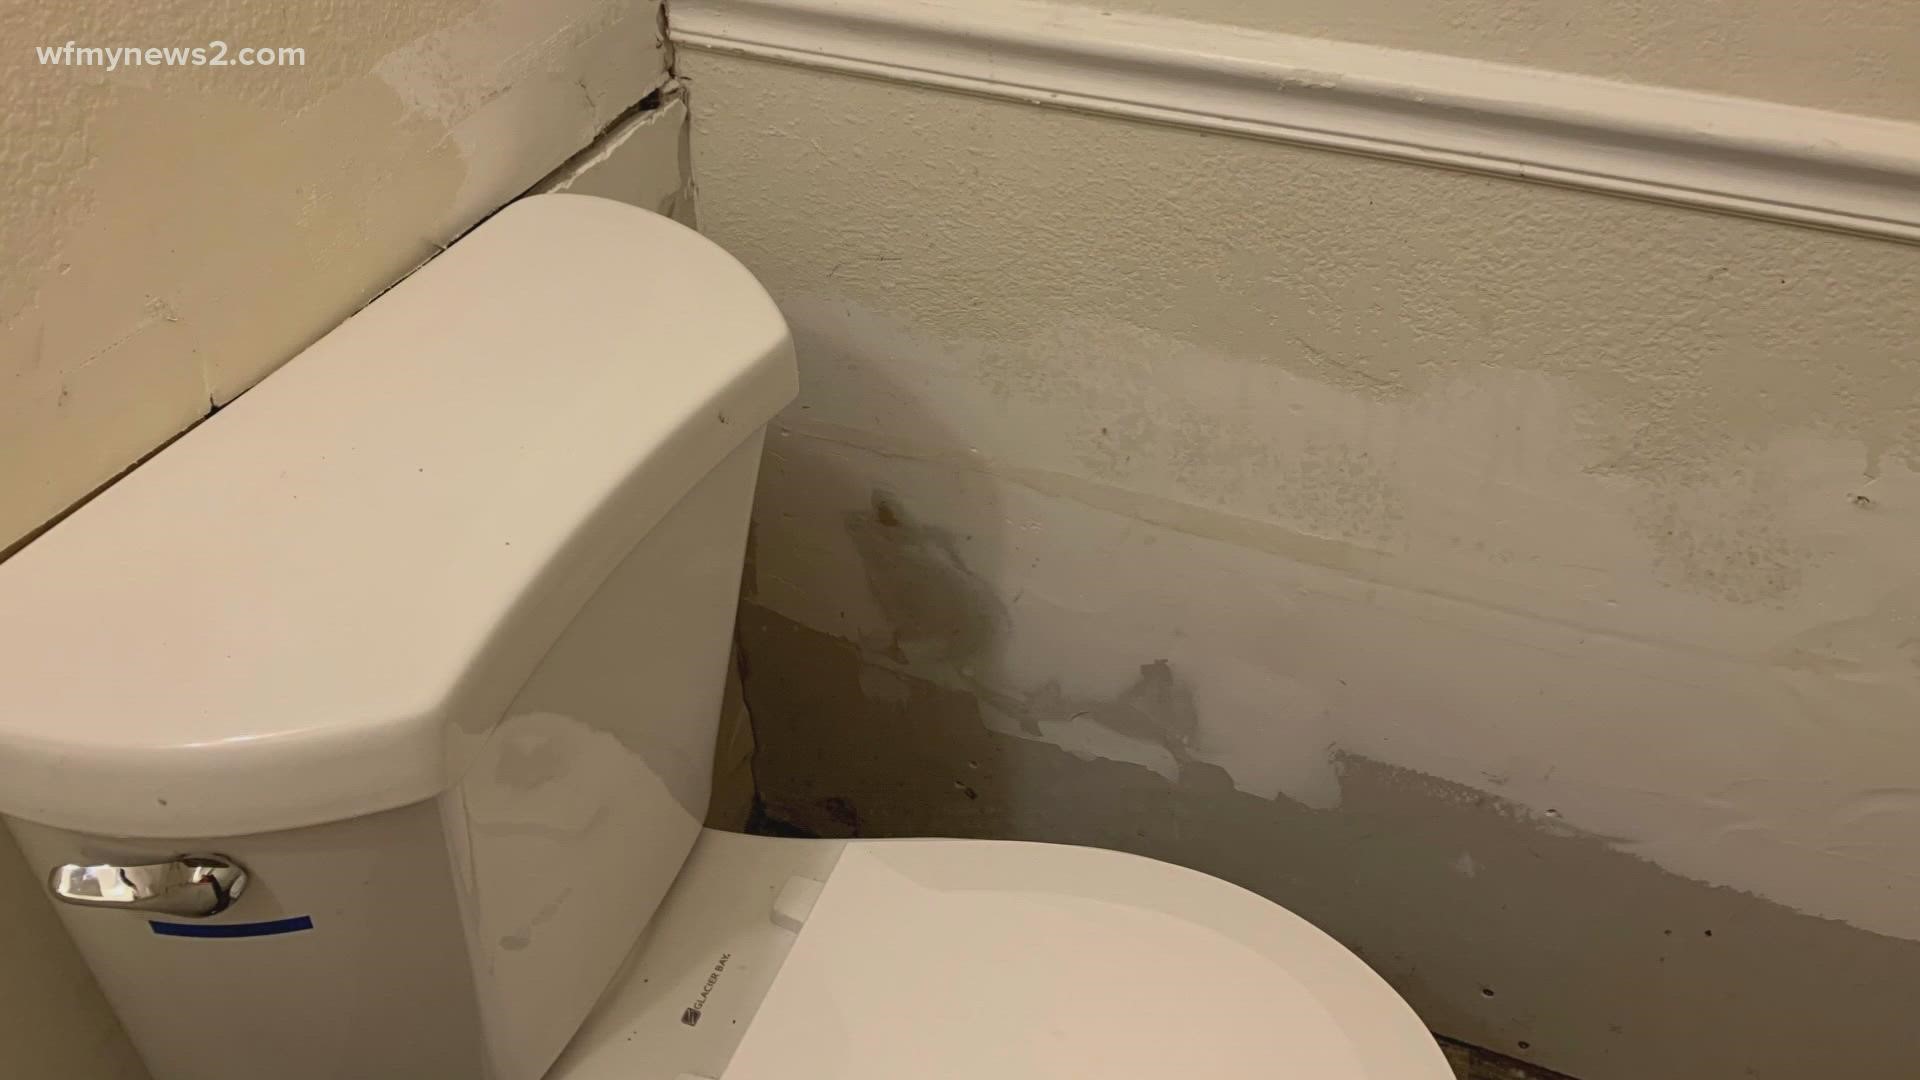 A Greensboro woman had to pay for her own hotel after sewage repairs forced her from her apartment.